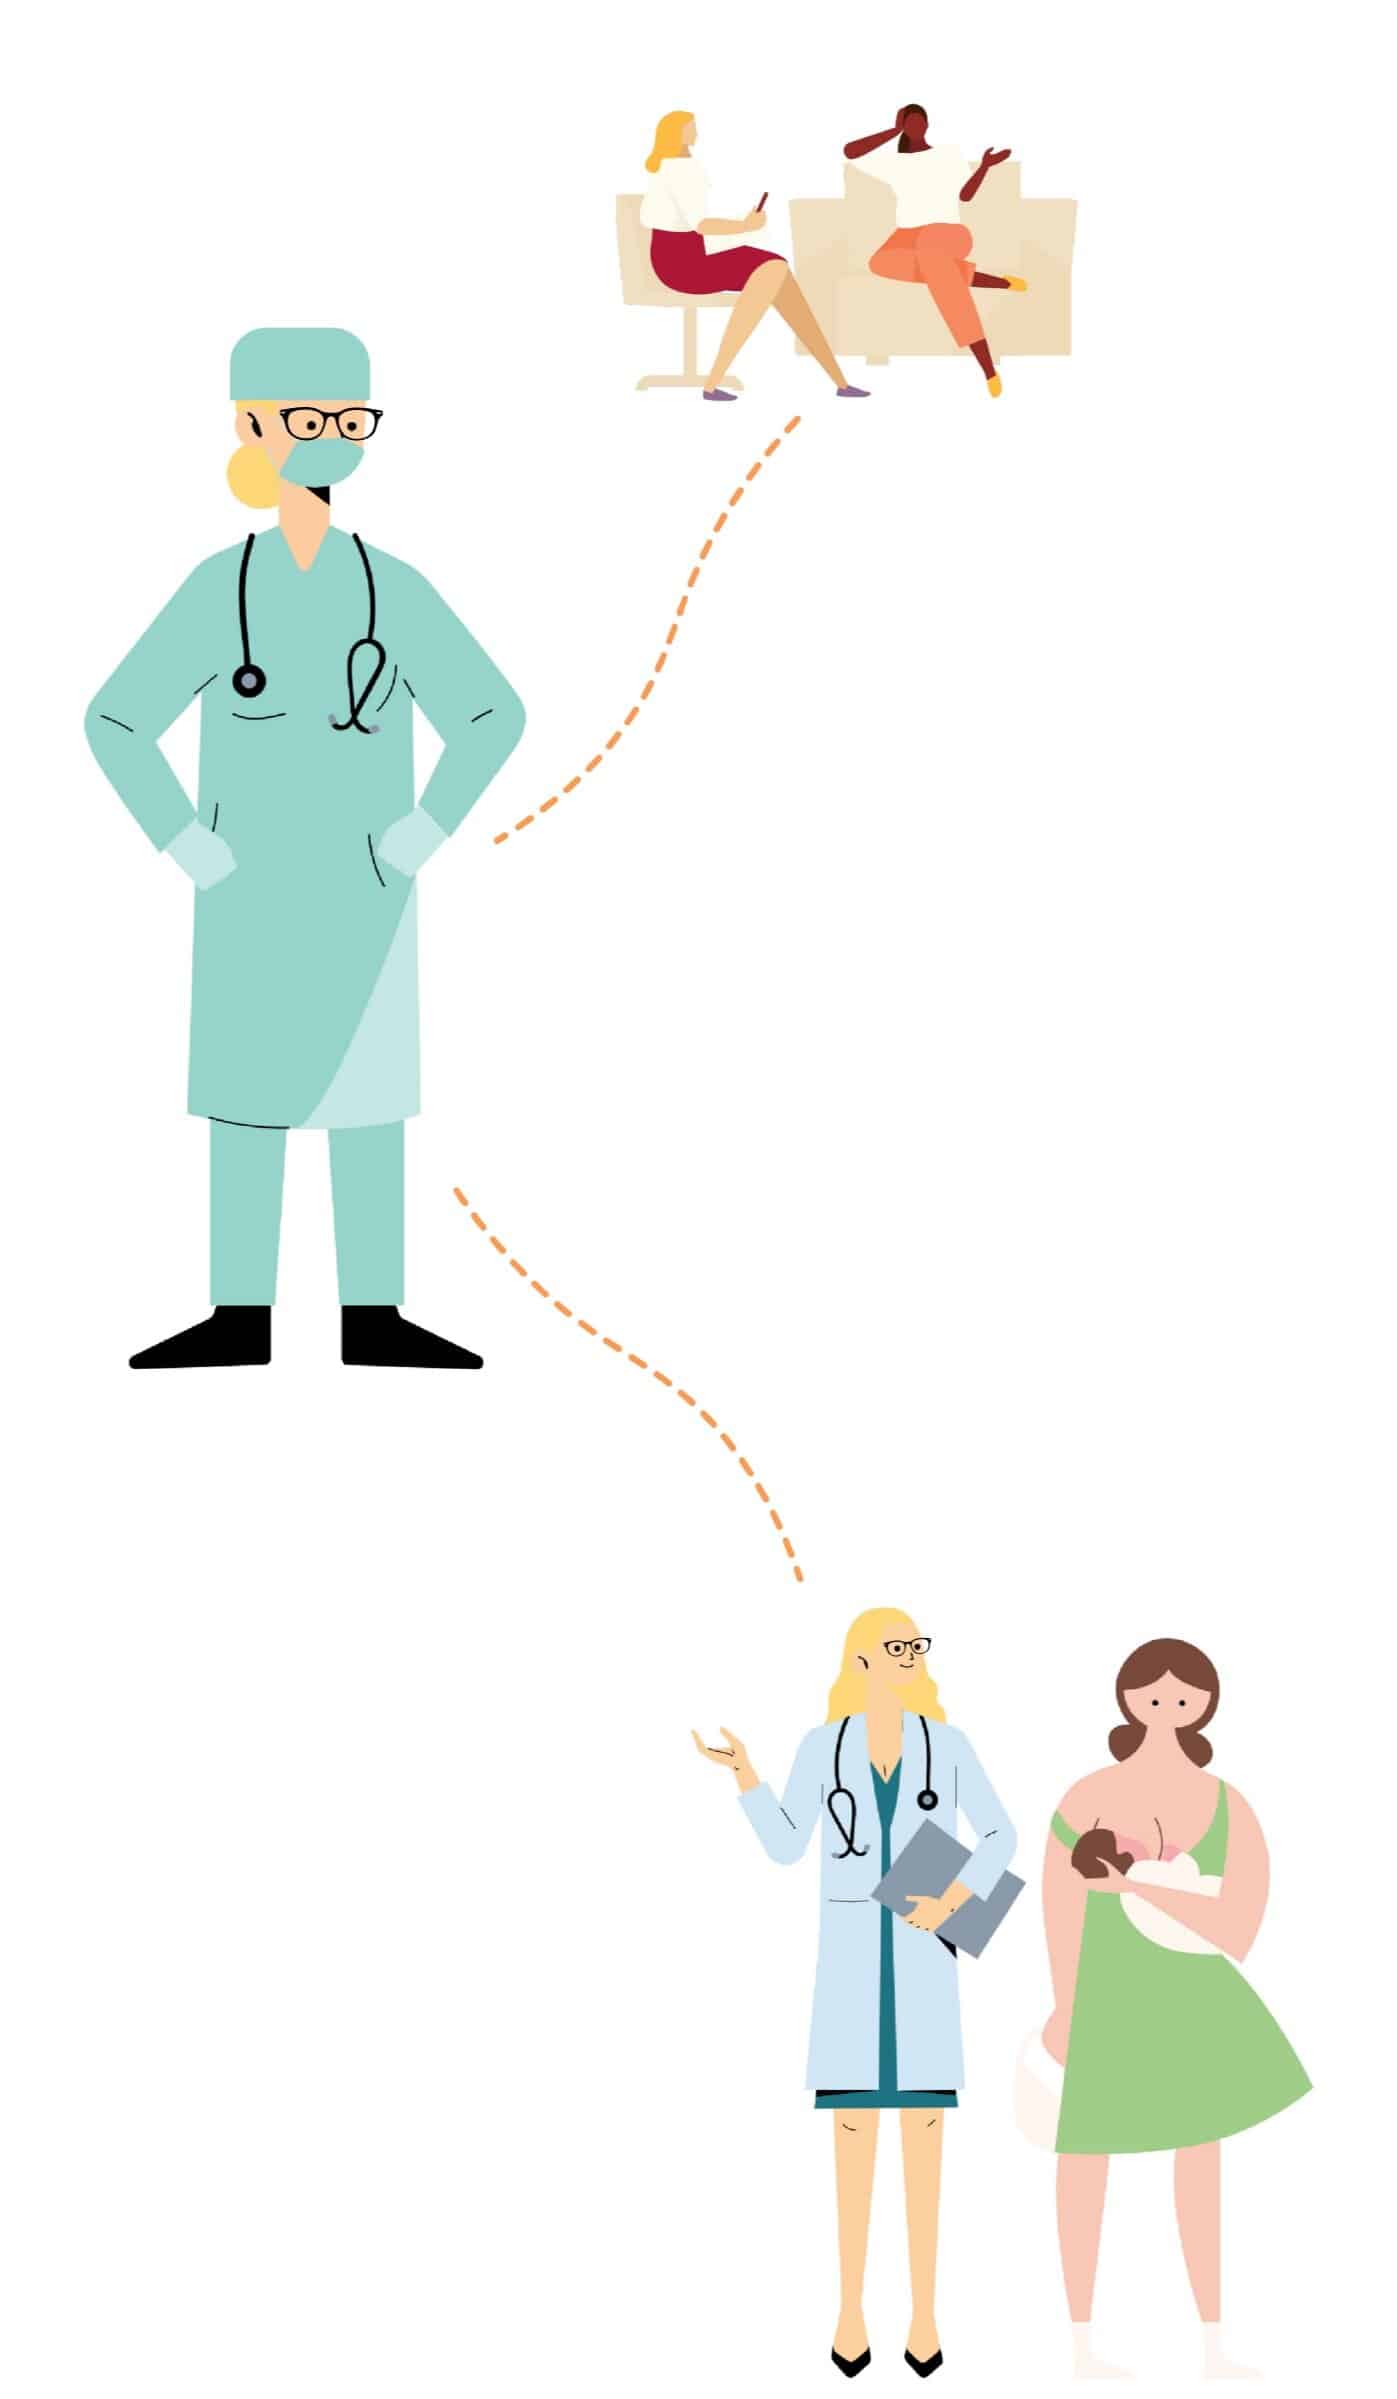 A three part graphic. Graphic 1 shows two women talking. Graphic 2 shows a female surgeon. Graphic 3 shows a doctor giving advice to a woman with a newborn child.